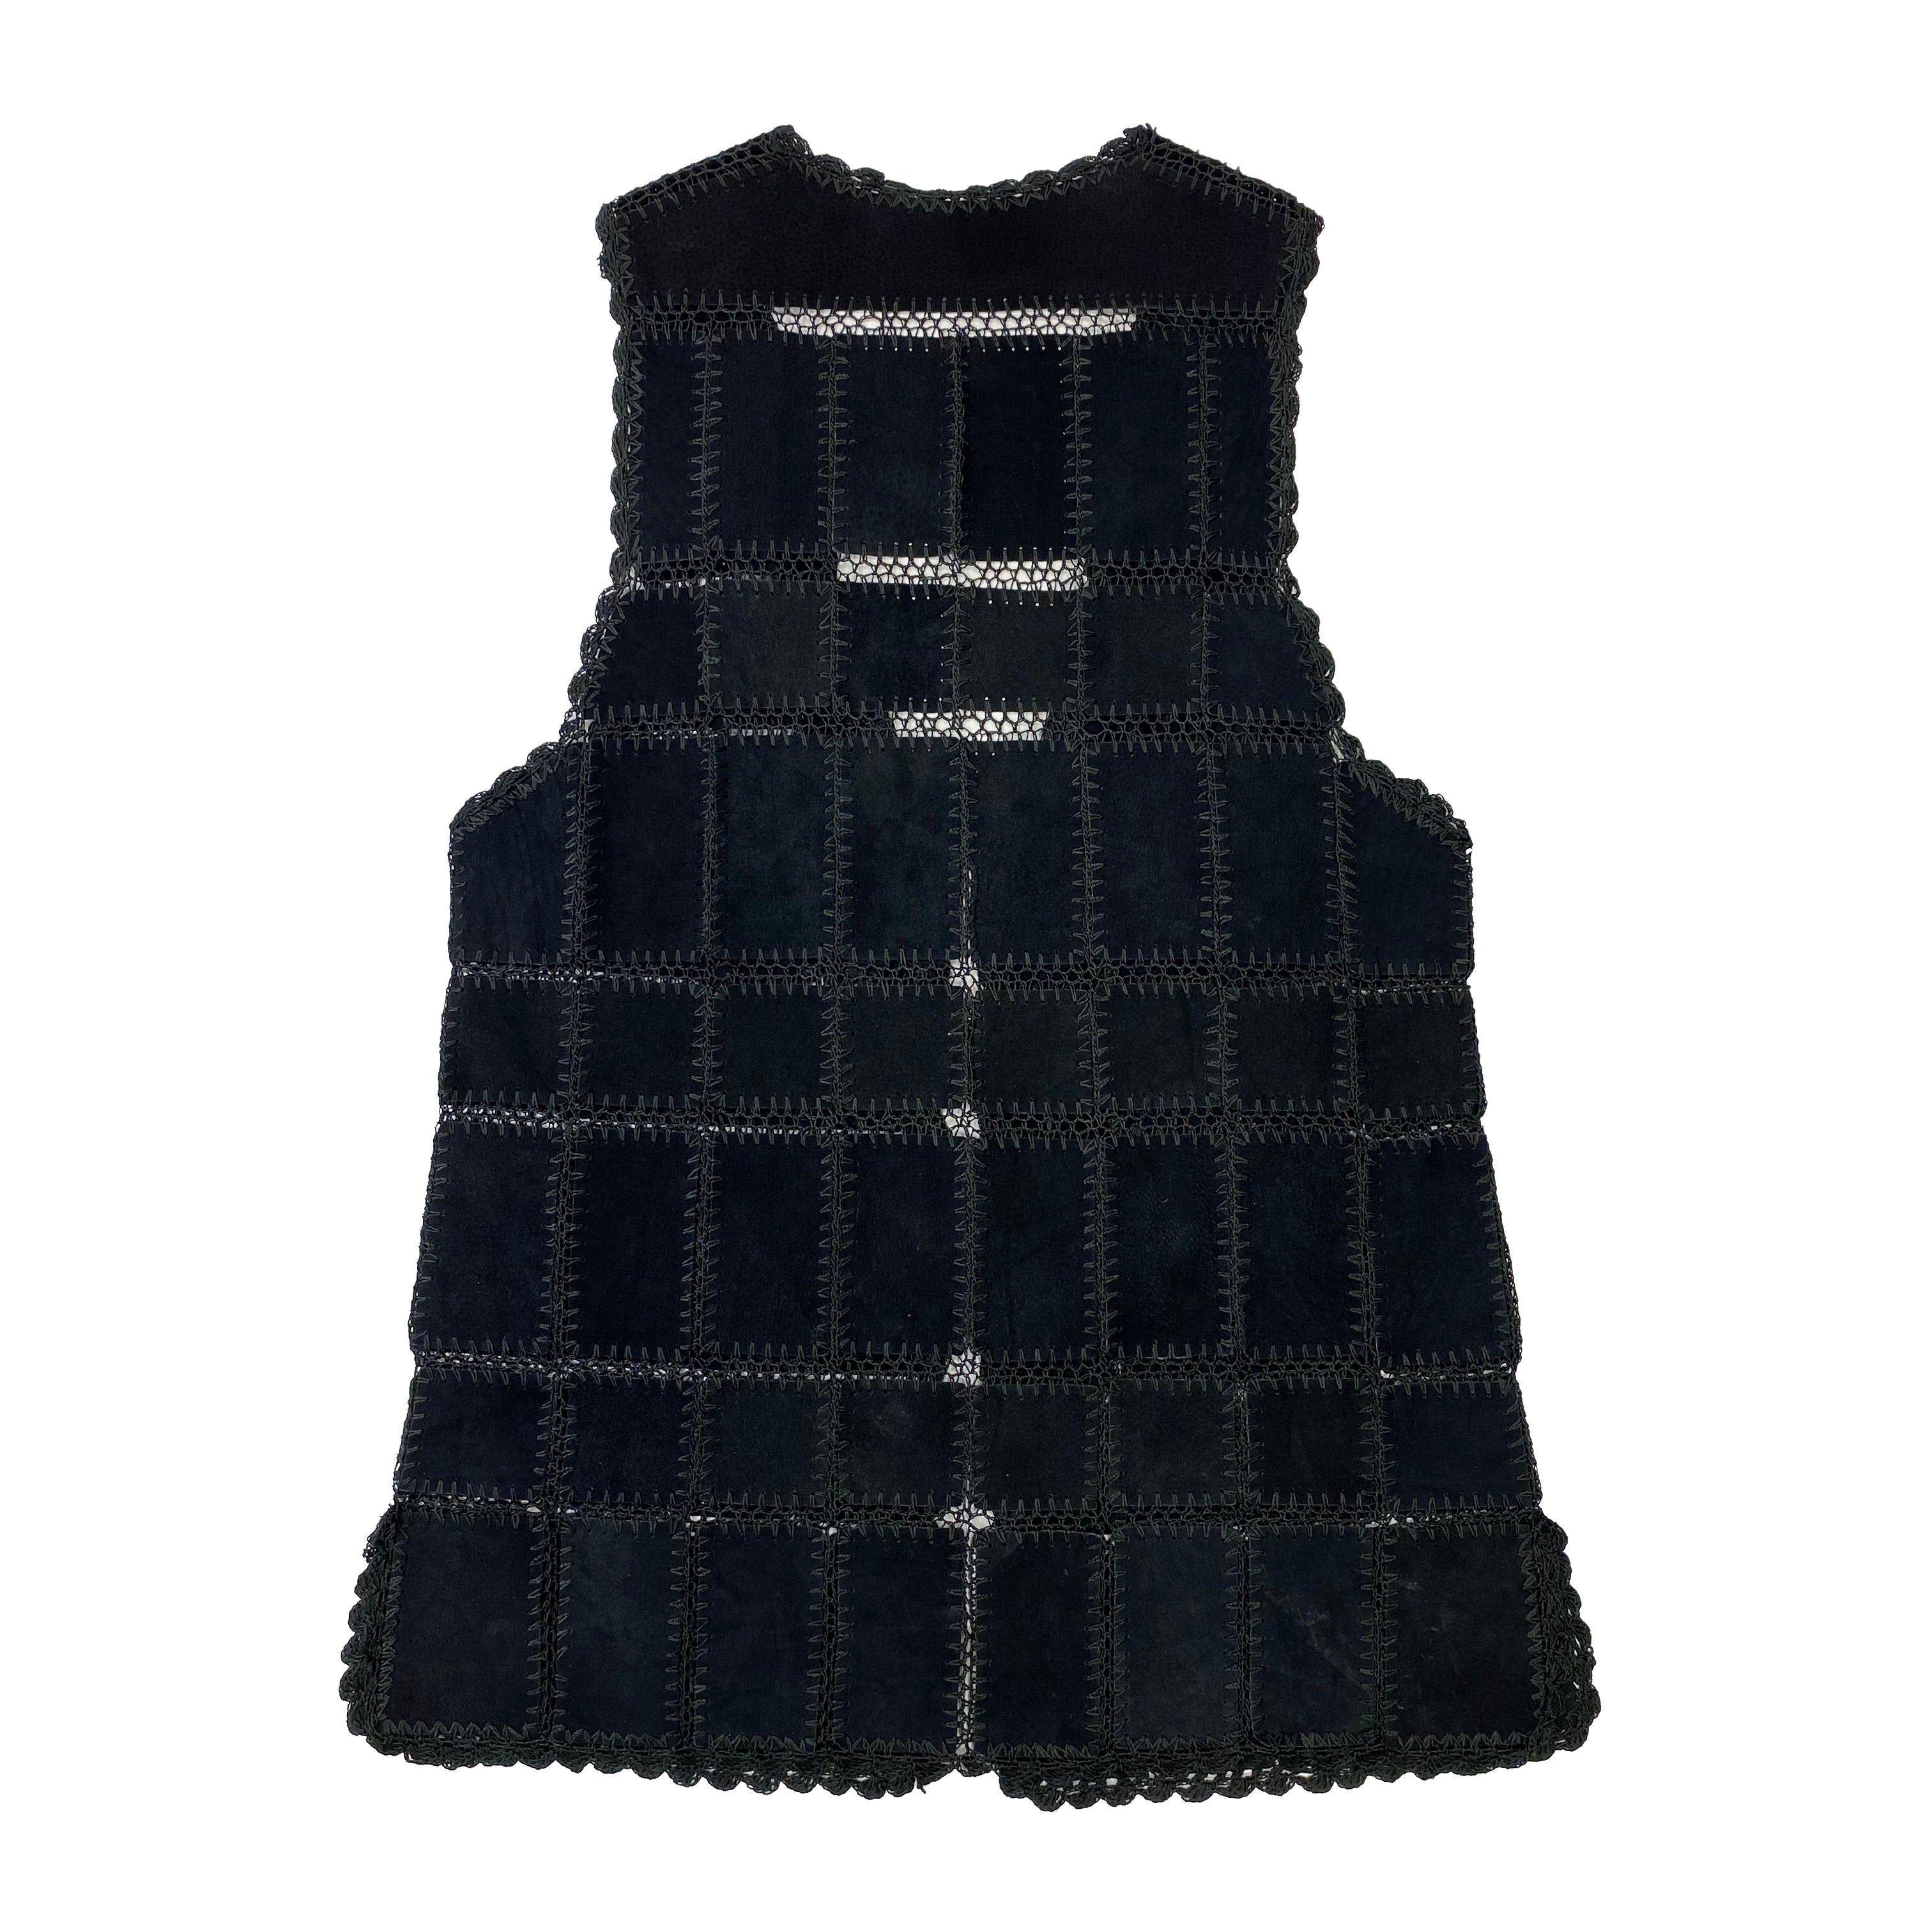 Leather Patchwork Crochet Detailled Tunic/Dress